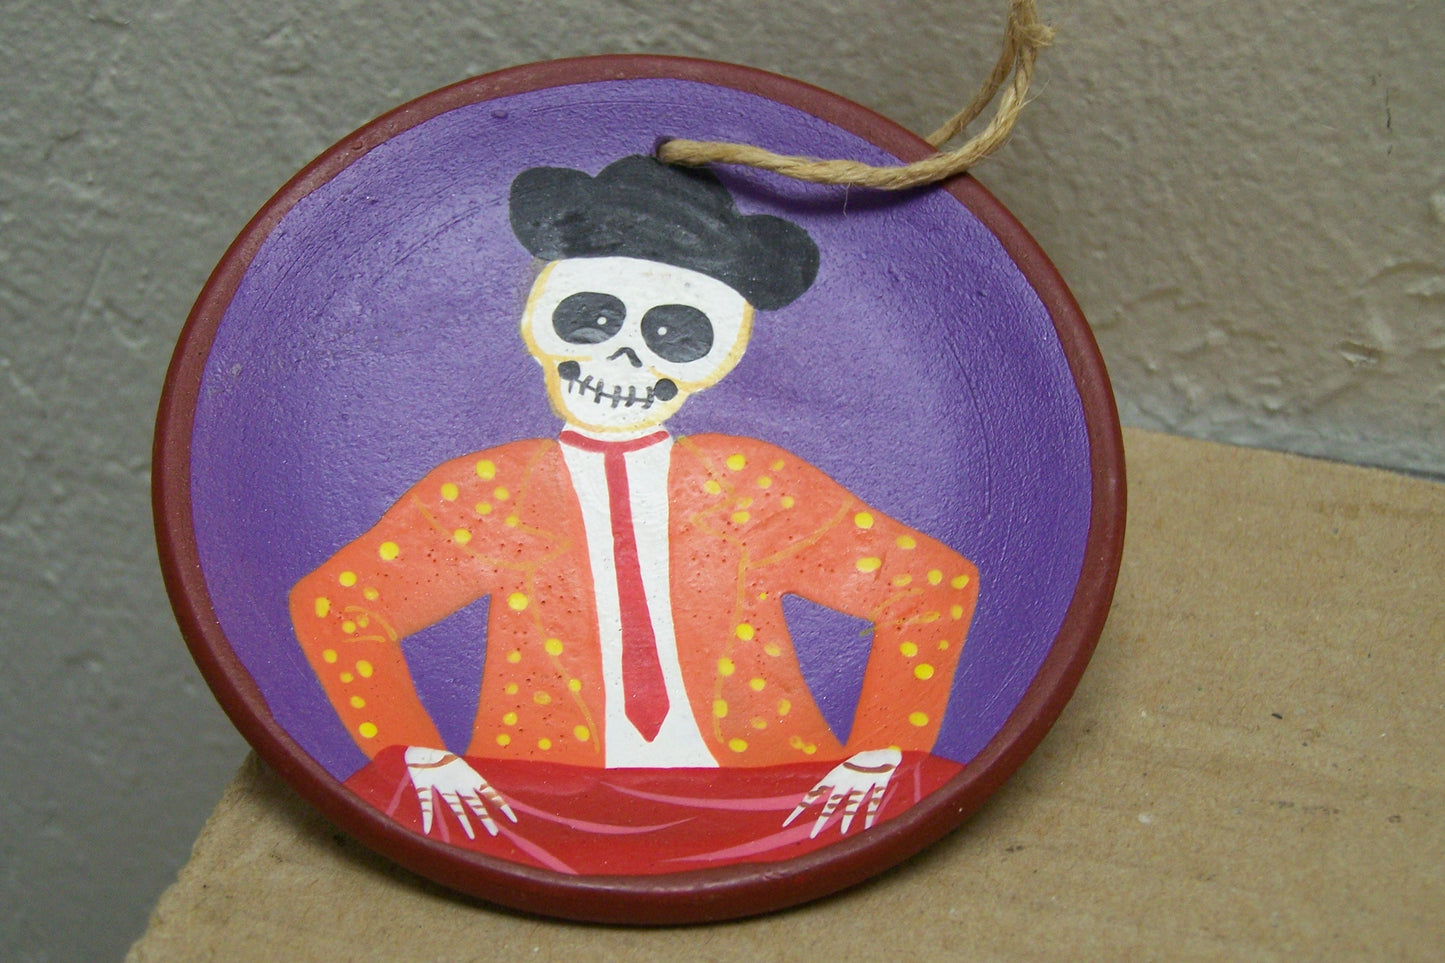 Day of the Dead Painted Clay Plate Ornament - Skeleton Bullfighter/Torero